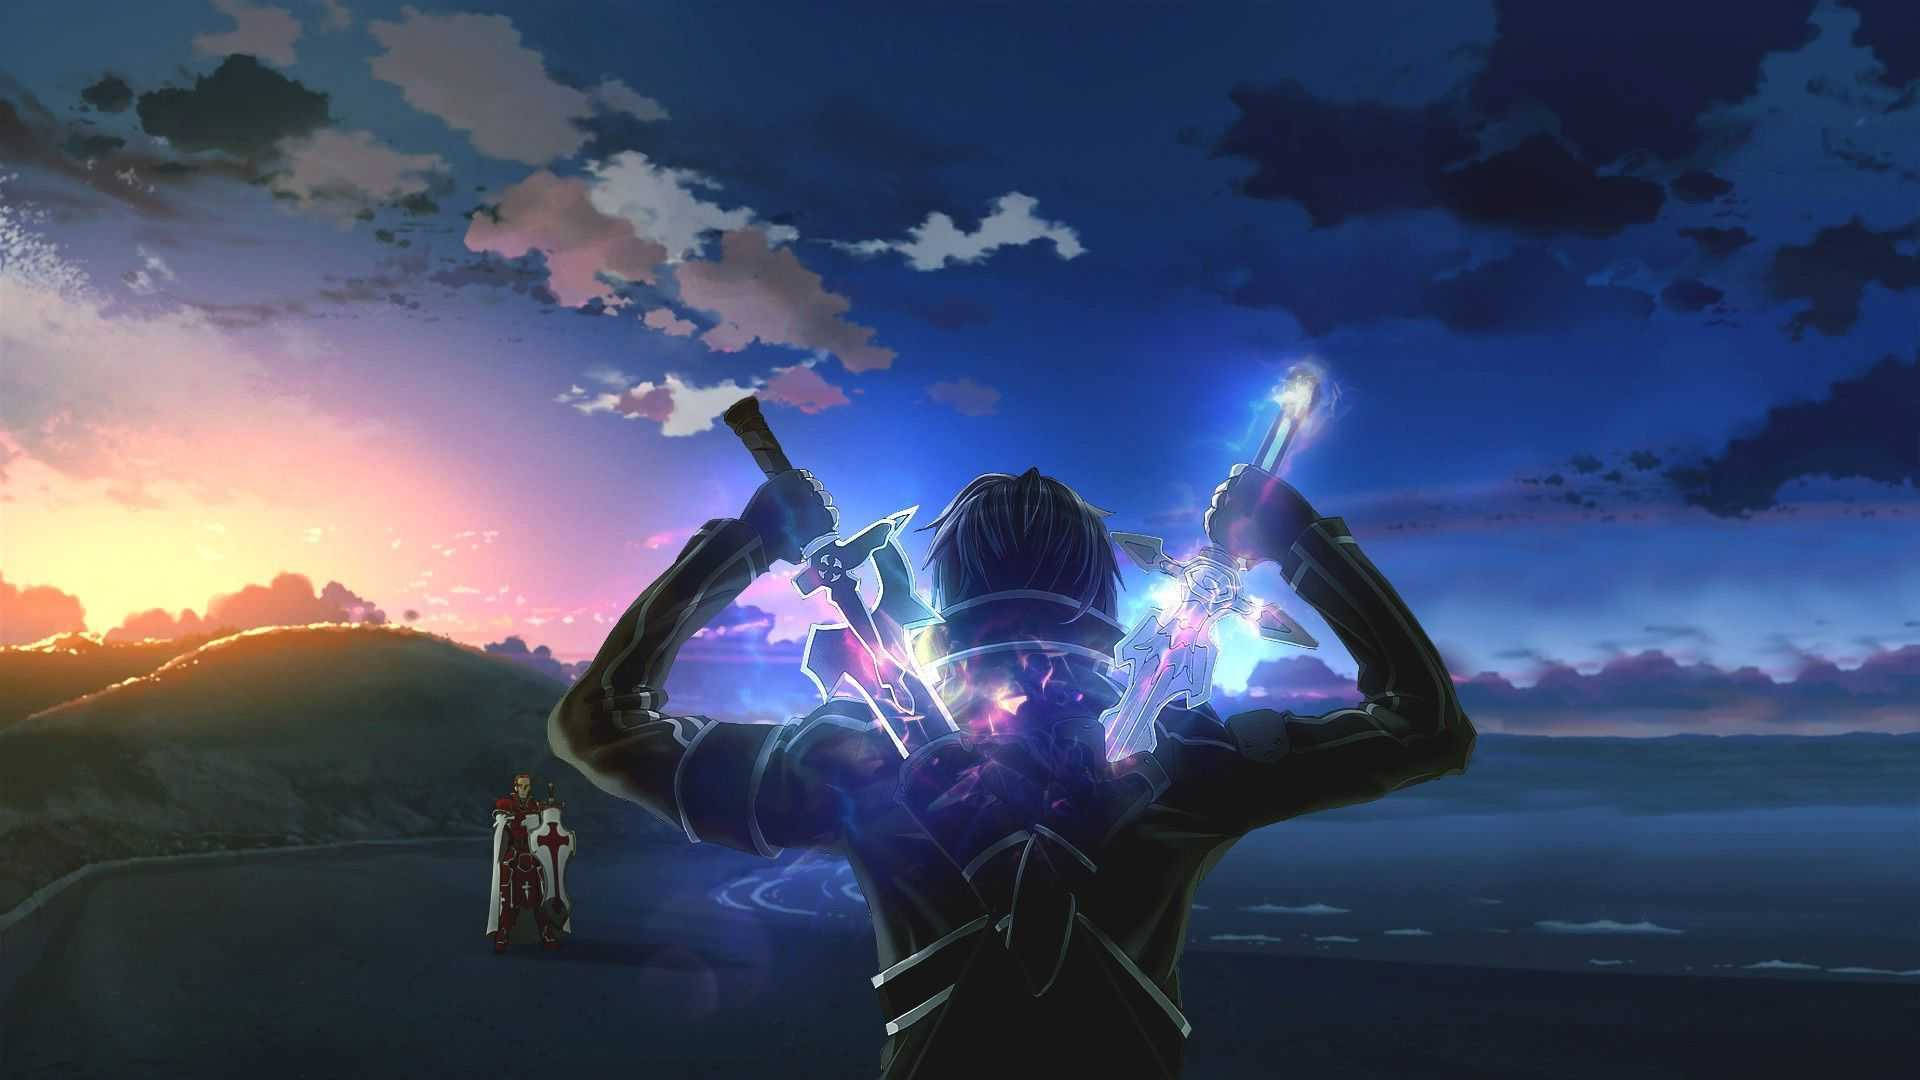 A Man Holding A Sword And Looking At The Sunset Background